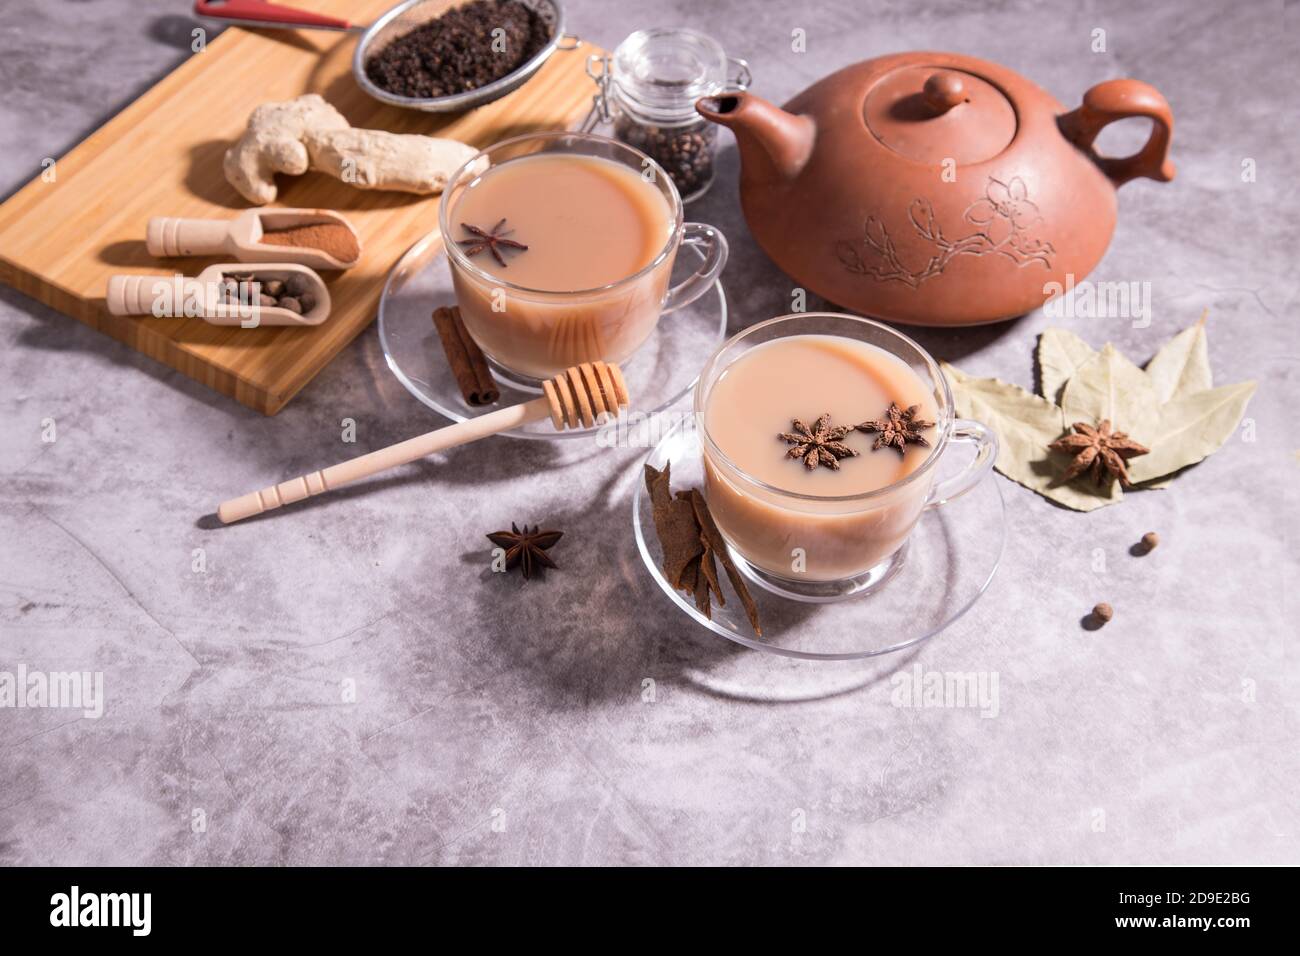 Indian tea masala tea. Tea with milk and spices in wooden spoons. Horizontal orientation Stock Photo